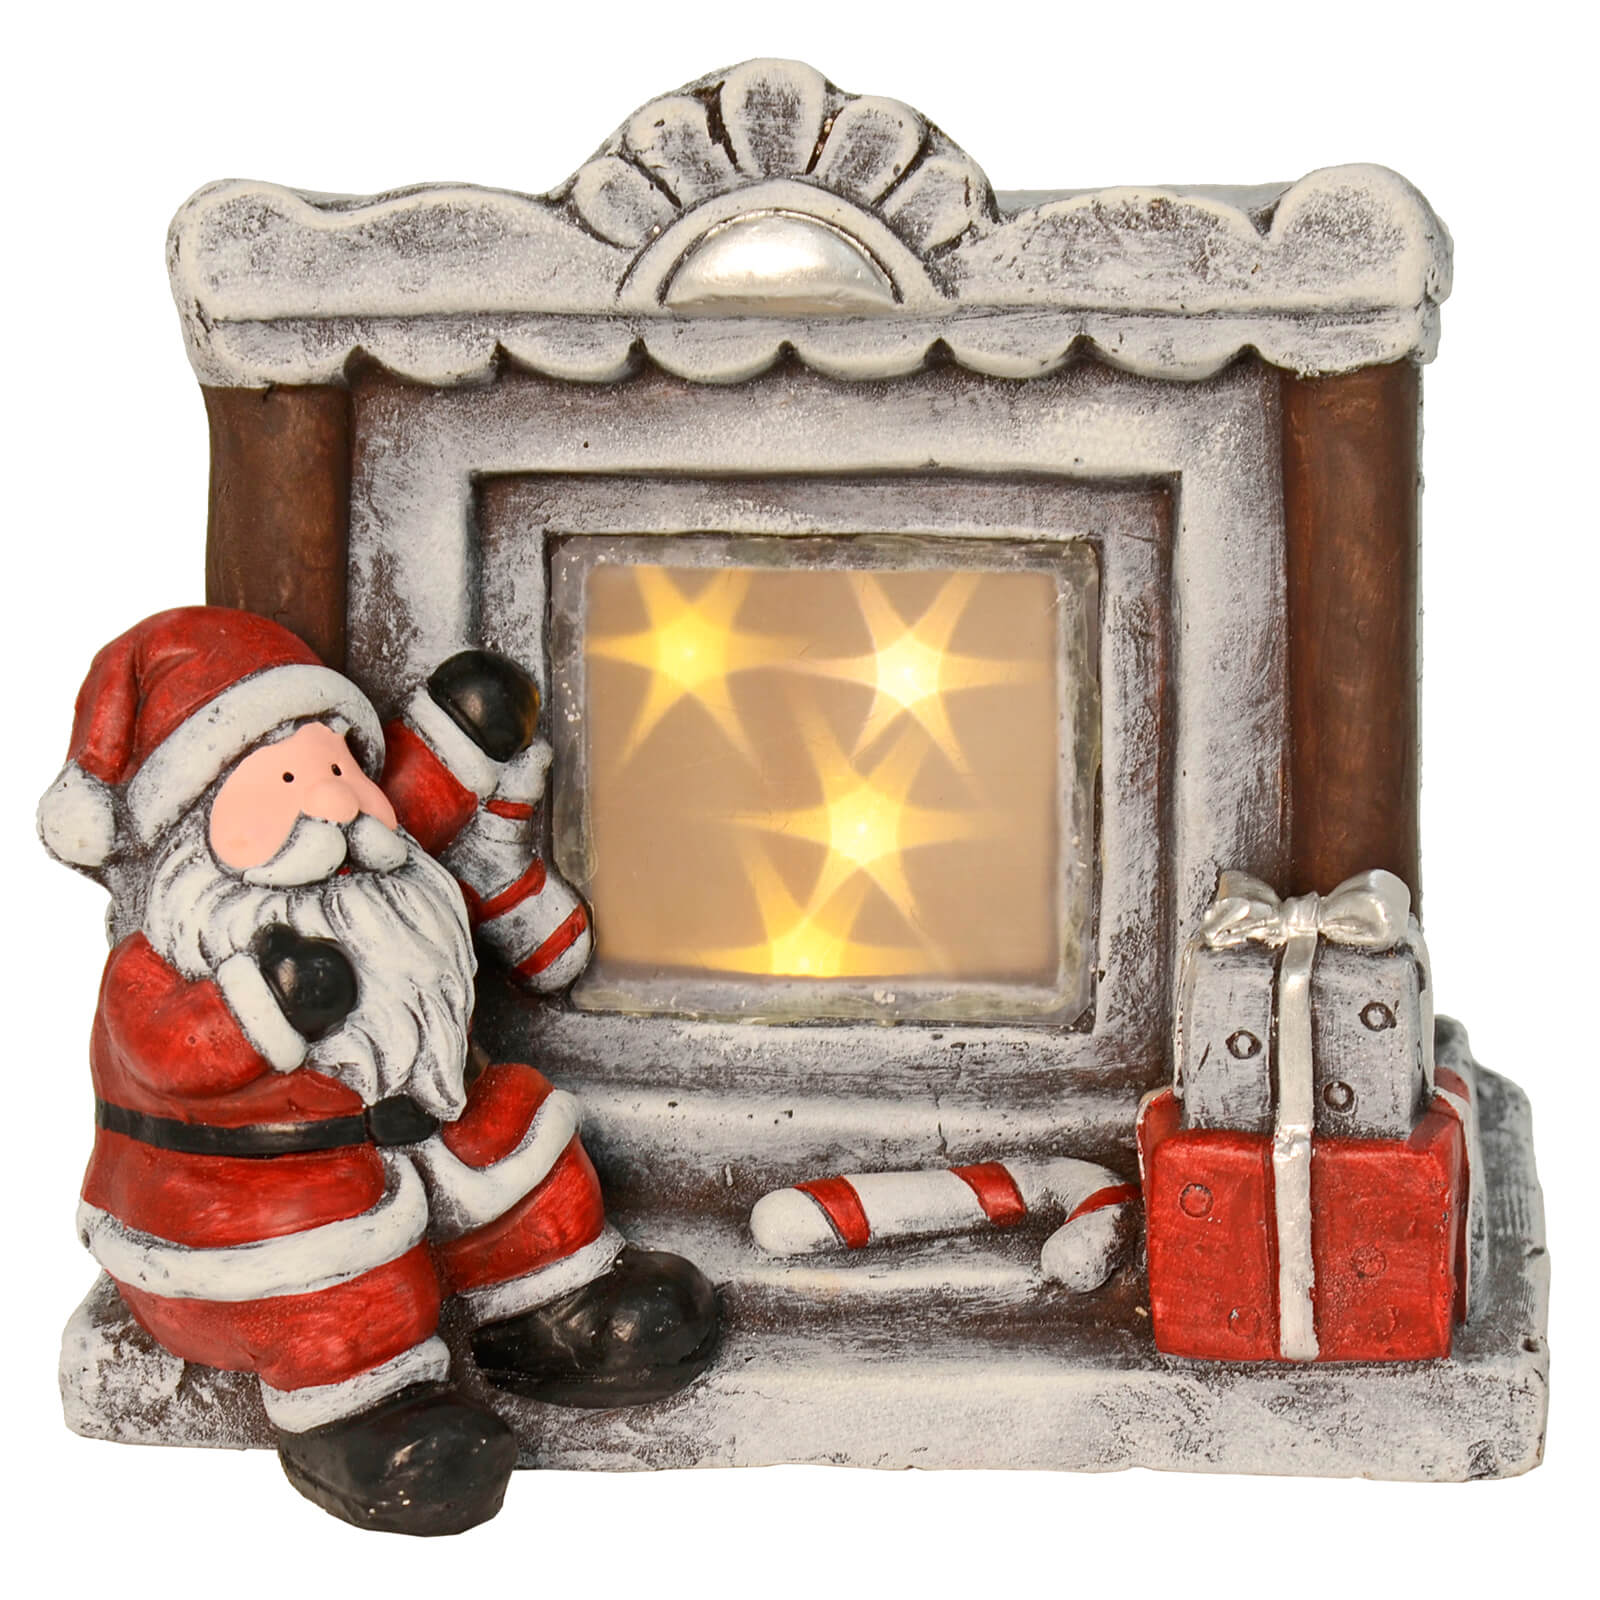 Santa Claus stitting at a fireplace Christmas ornament with light up stars, retro mantelpiece, stock, candy cane and Christmas presents